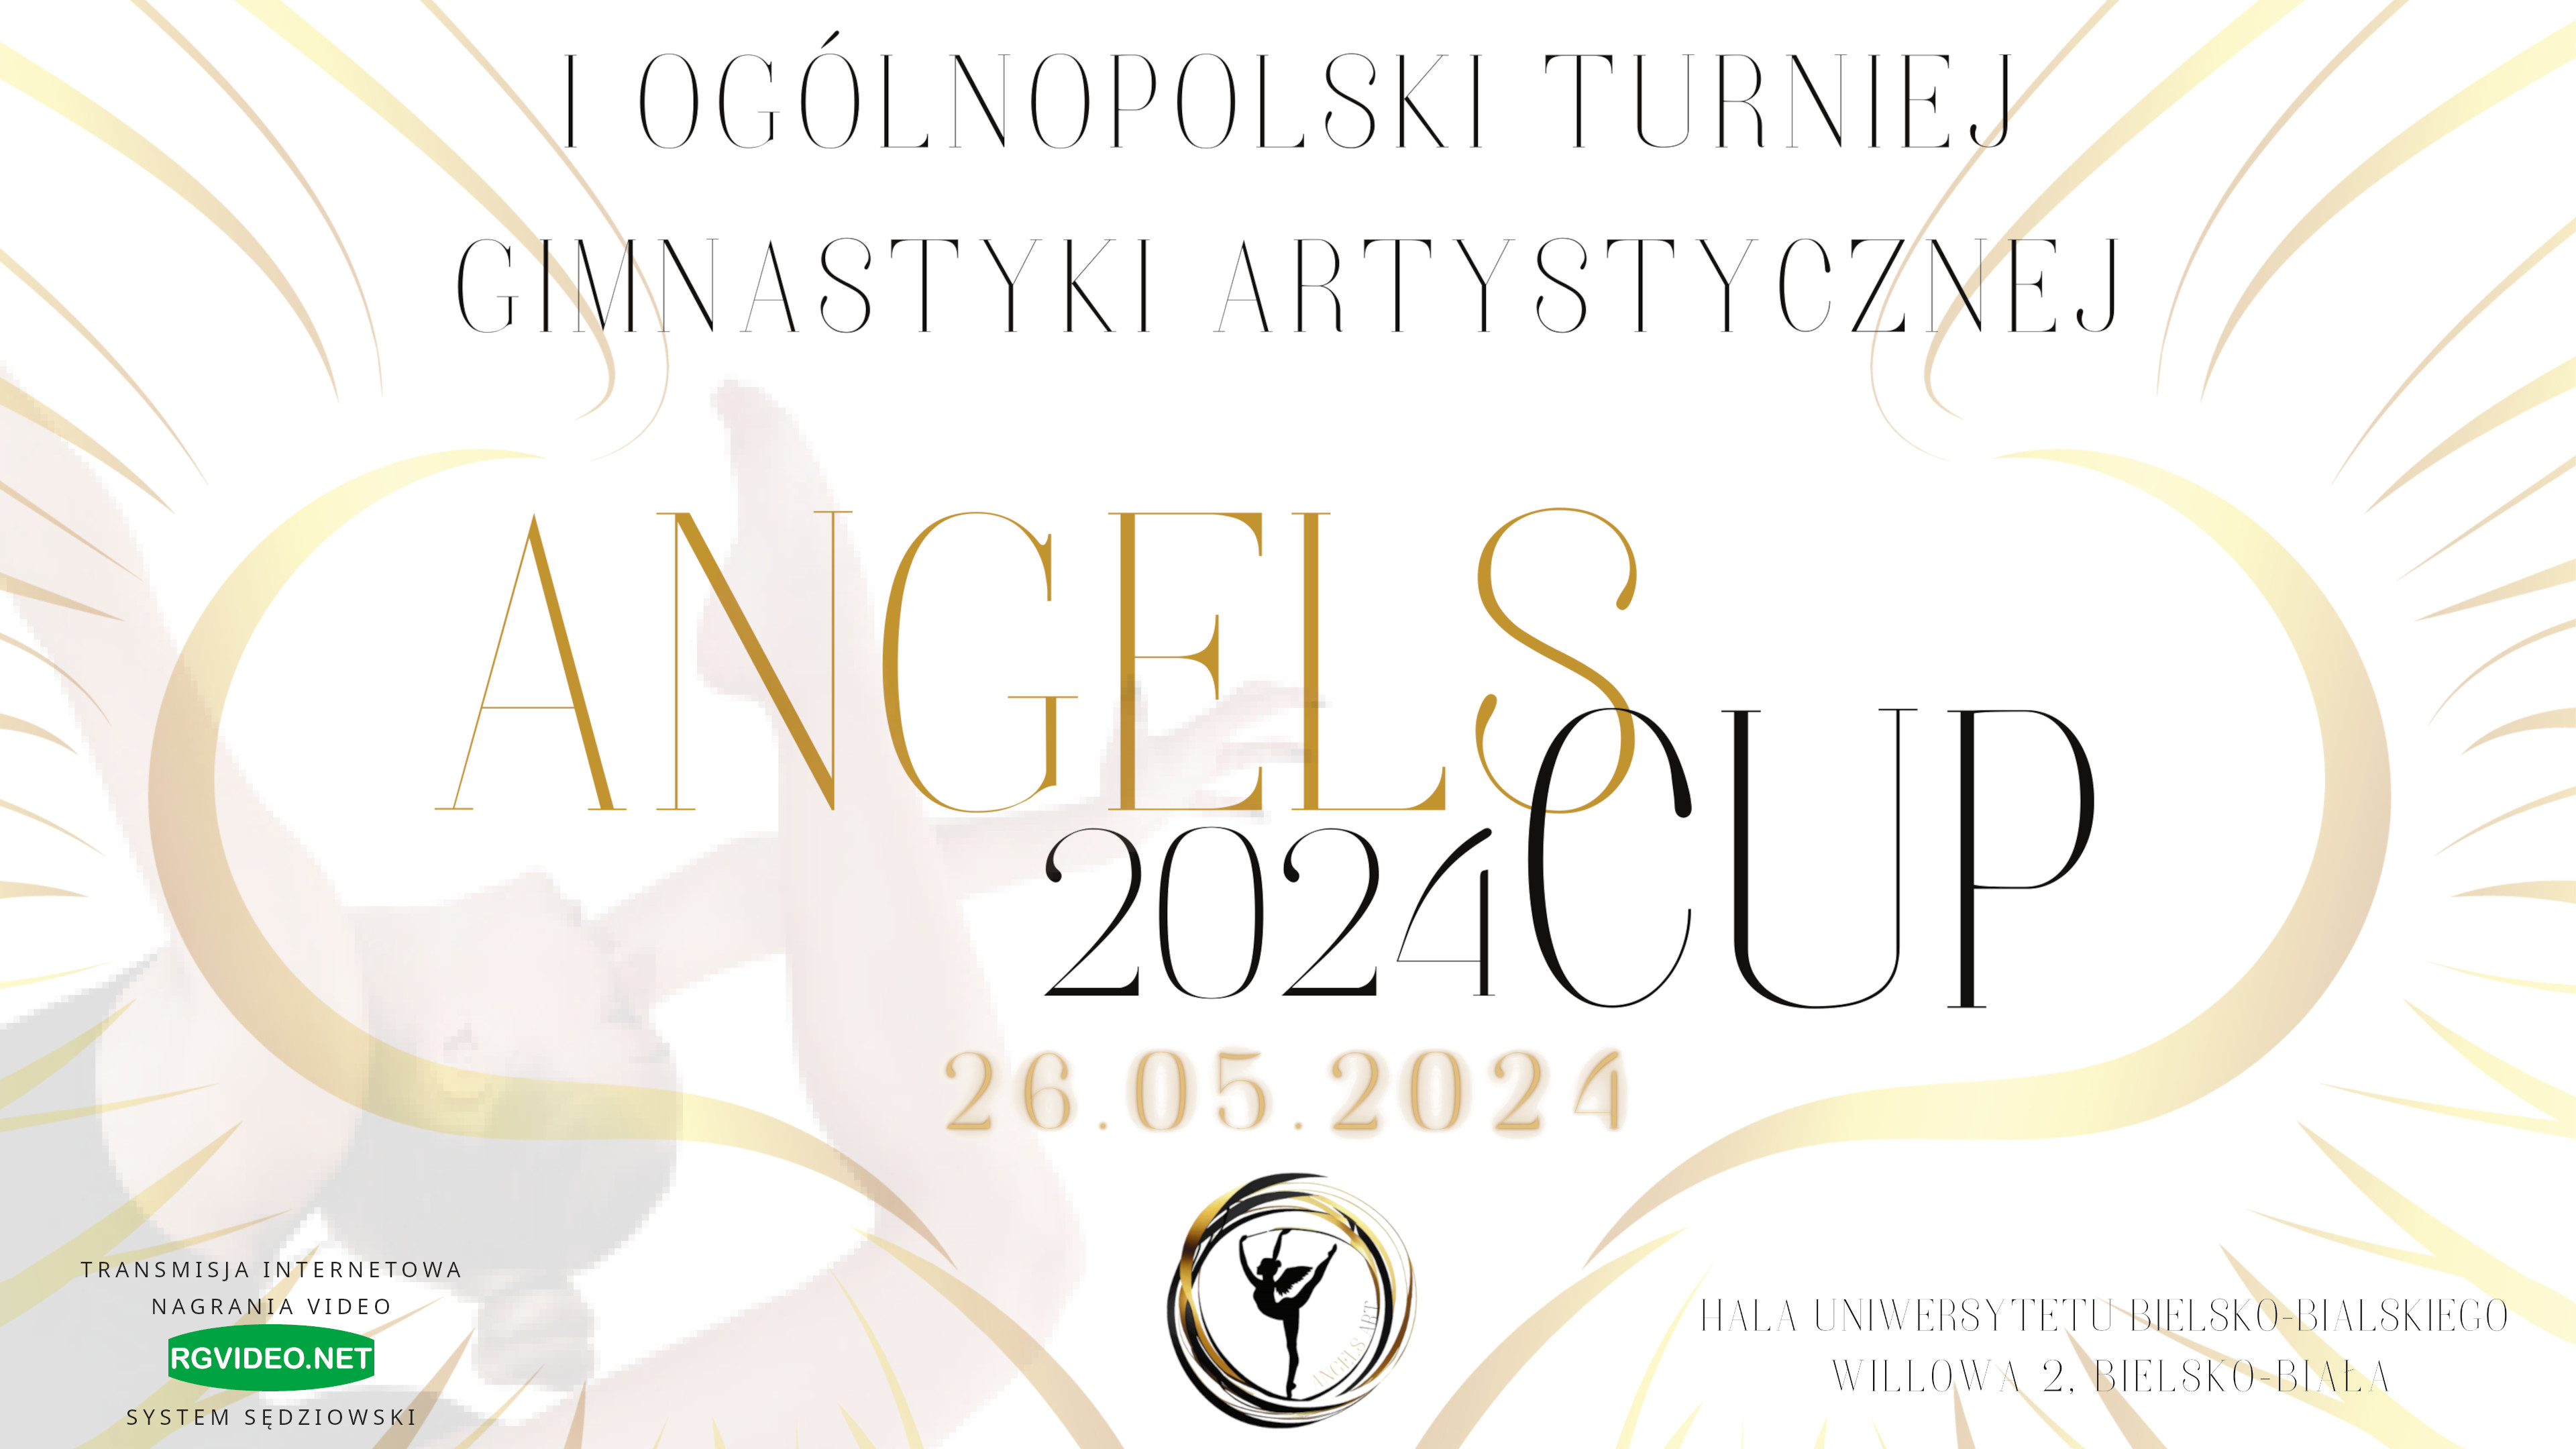 VIDEO - ANGELS CUP 2024